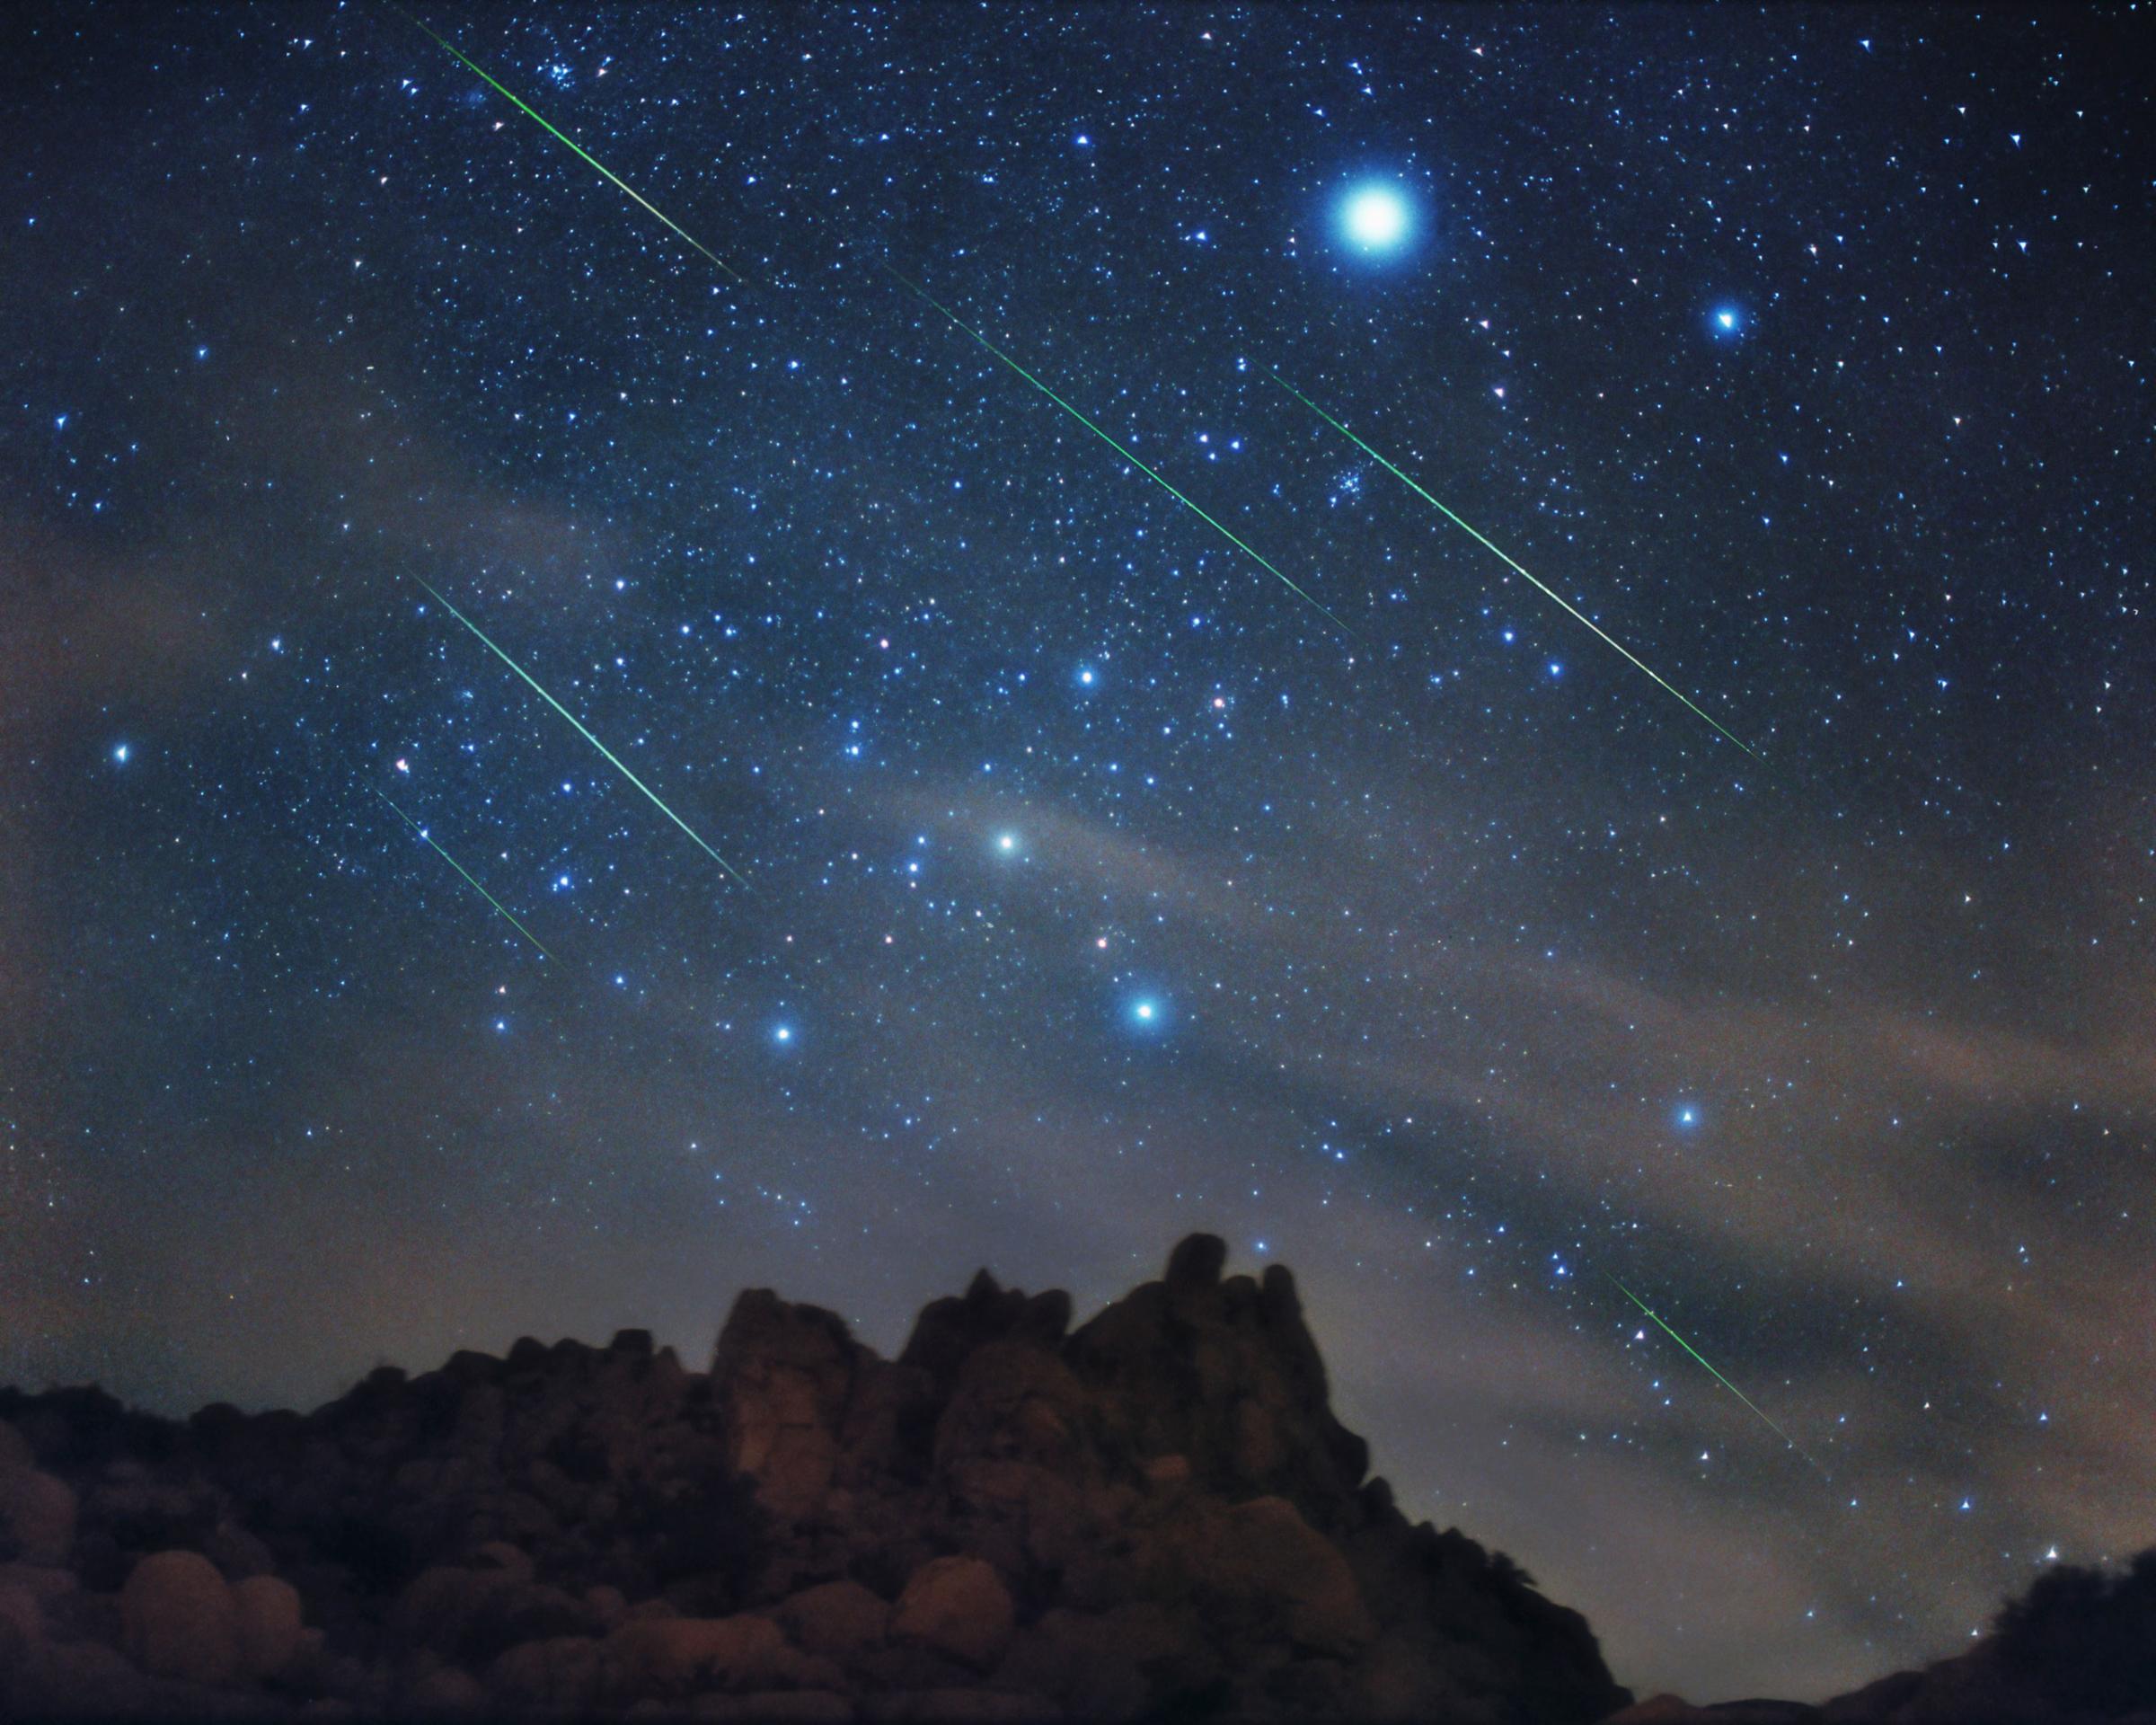 A multiple exposure of a Leonid meteor shower over Joshua Tree National Park.